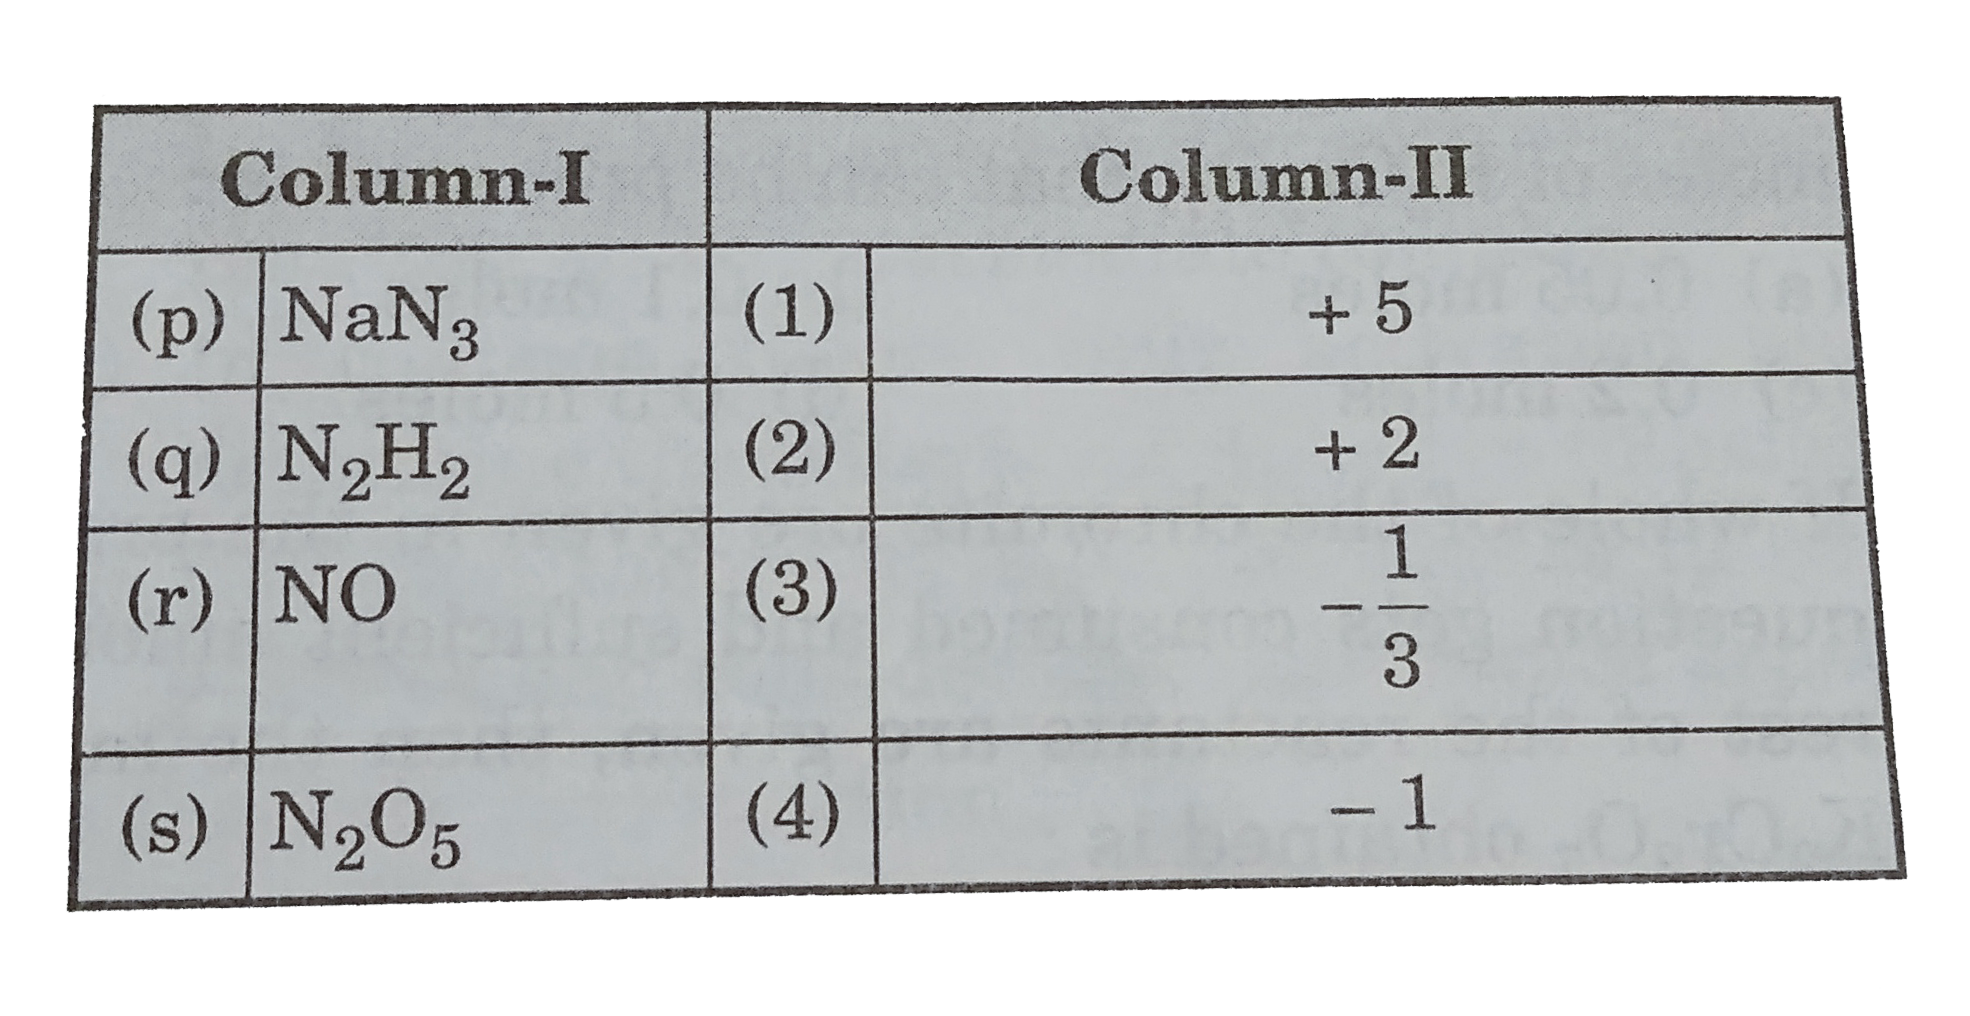 Match Column-I (Compounds) with Column-II (Oxidation states of Nitrogen) and select using the code given below the lists: